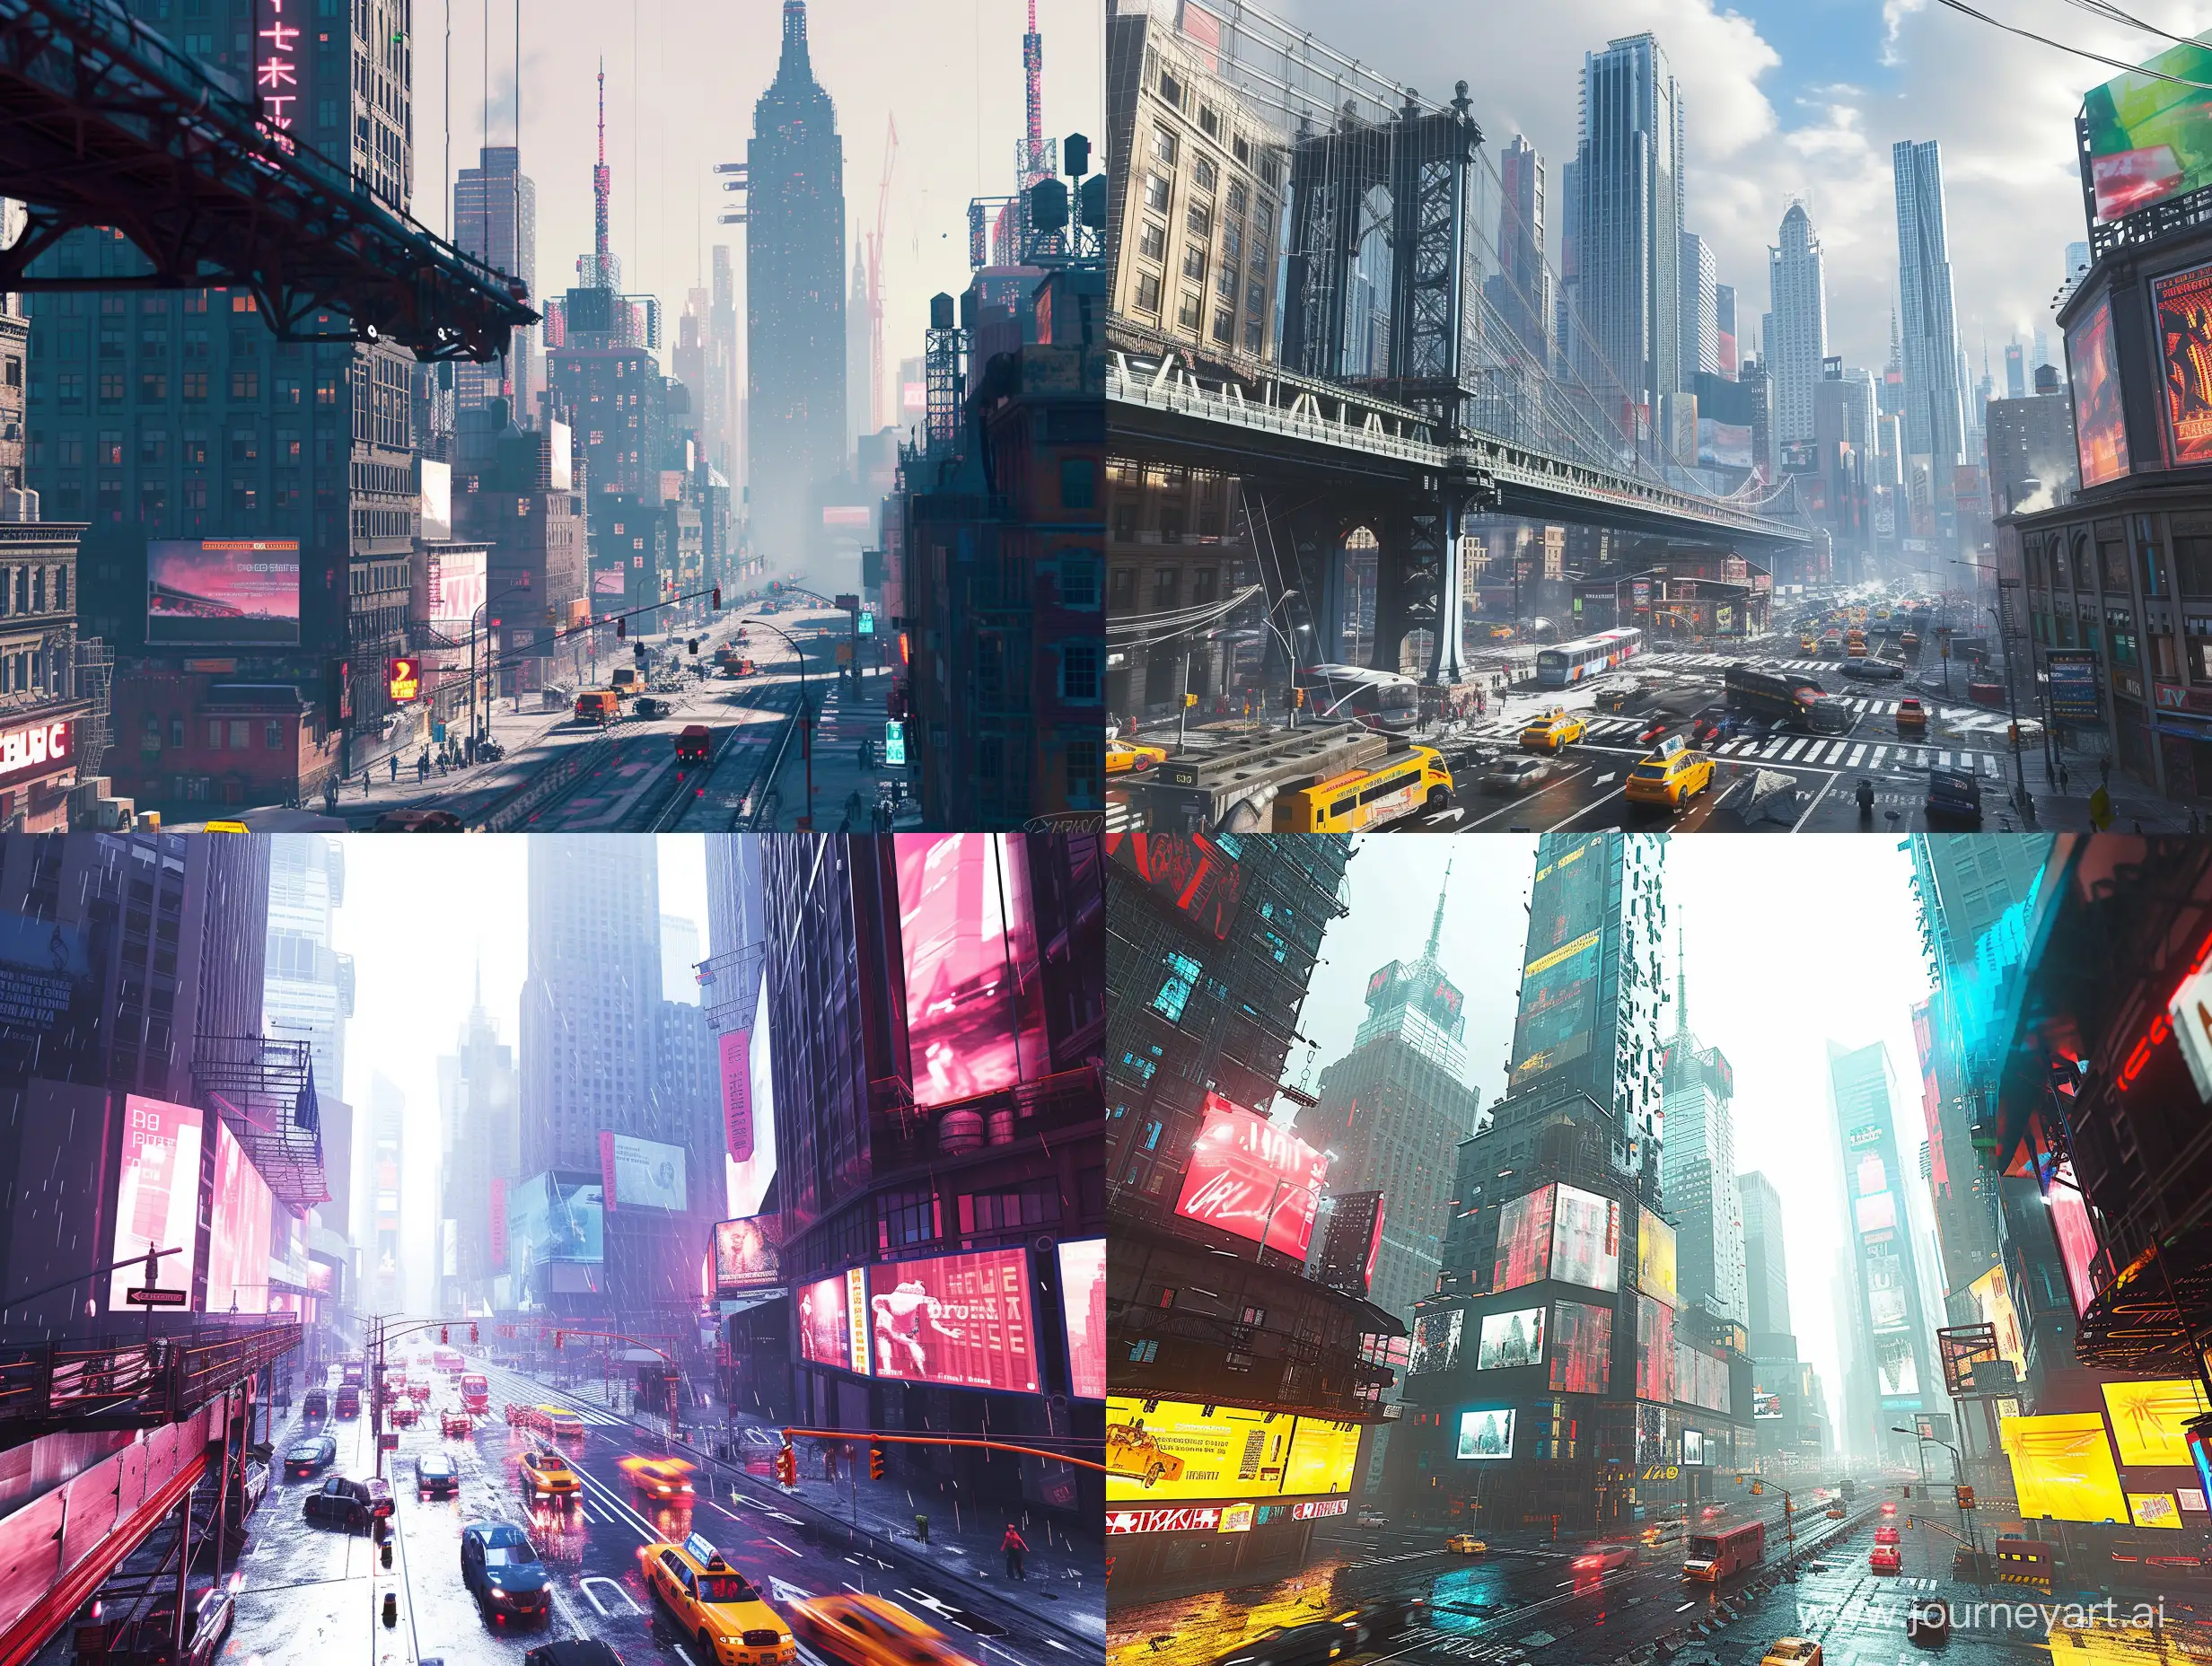 A vibrant science fiction depiction of New York City, featuring cinematic lighting and daytime transportation. The scene includes architectural elements, skyscrapers, and procedural details, presenting an open world environment with a raw style.



